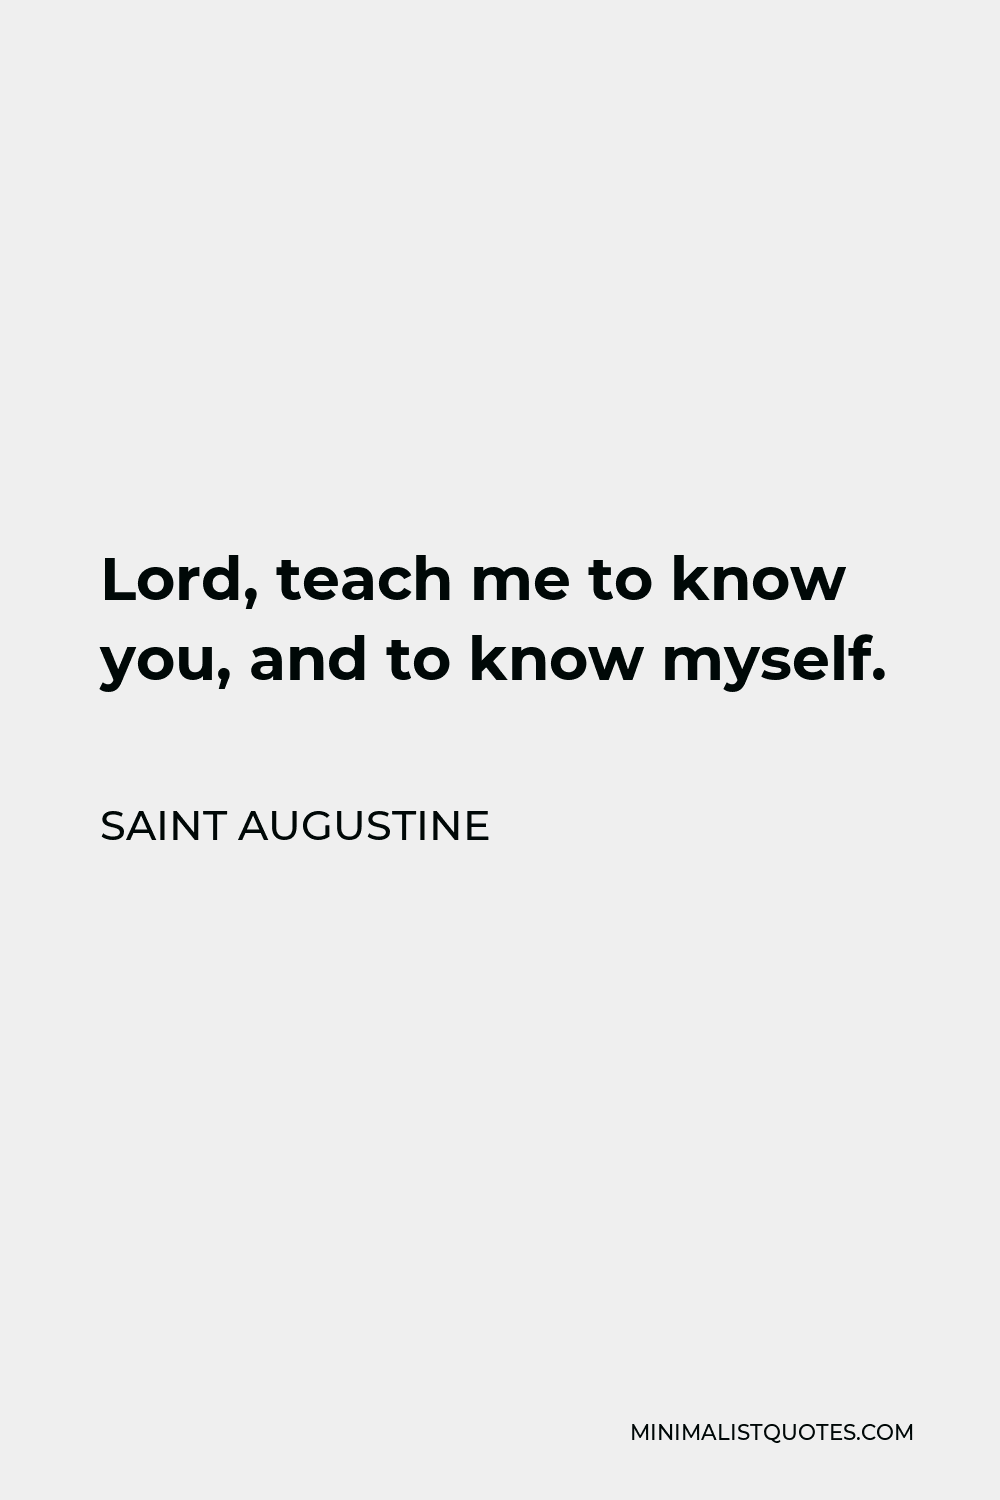 Saint Augustine Quote - Lord, teach me to know you, and to know myself.